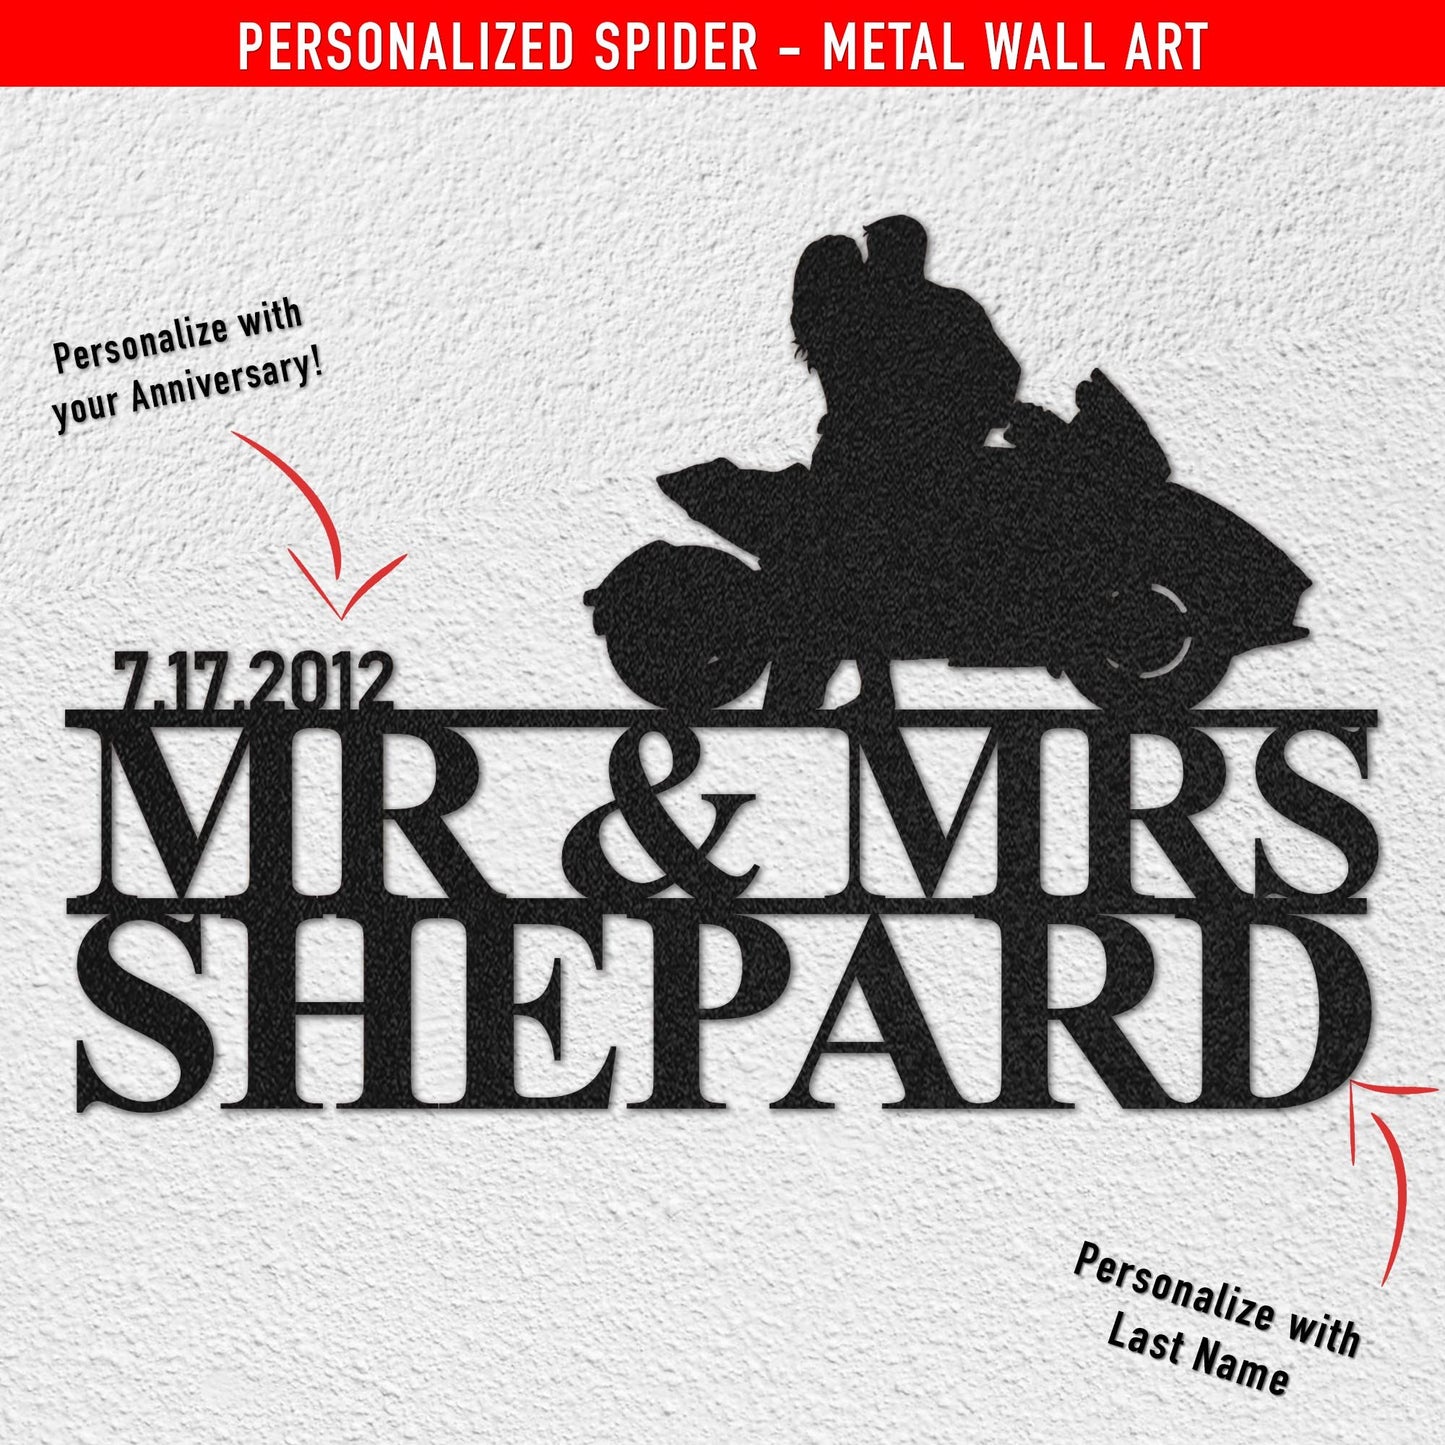 Spyder Married Couple - PERSONALIZED Metal Wall Art (🇺🇸Made In The USA) - Original